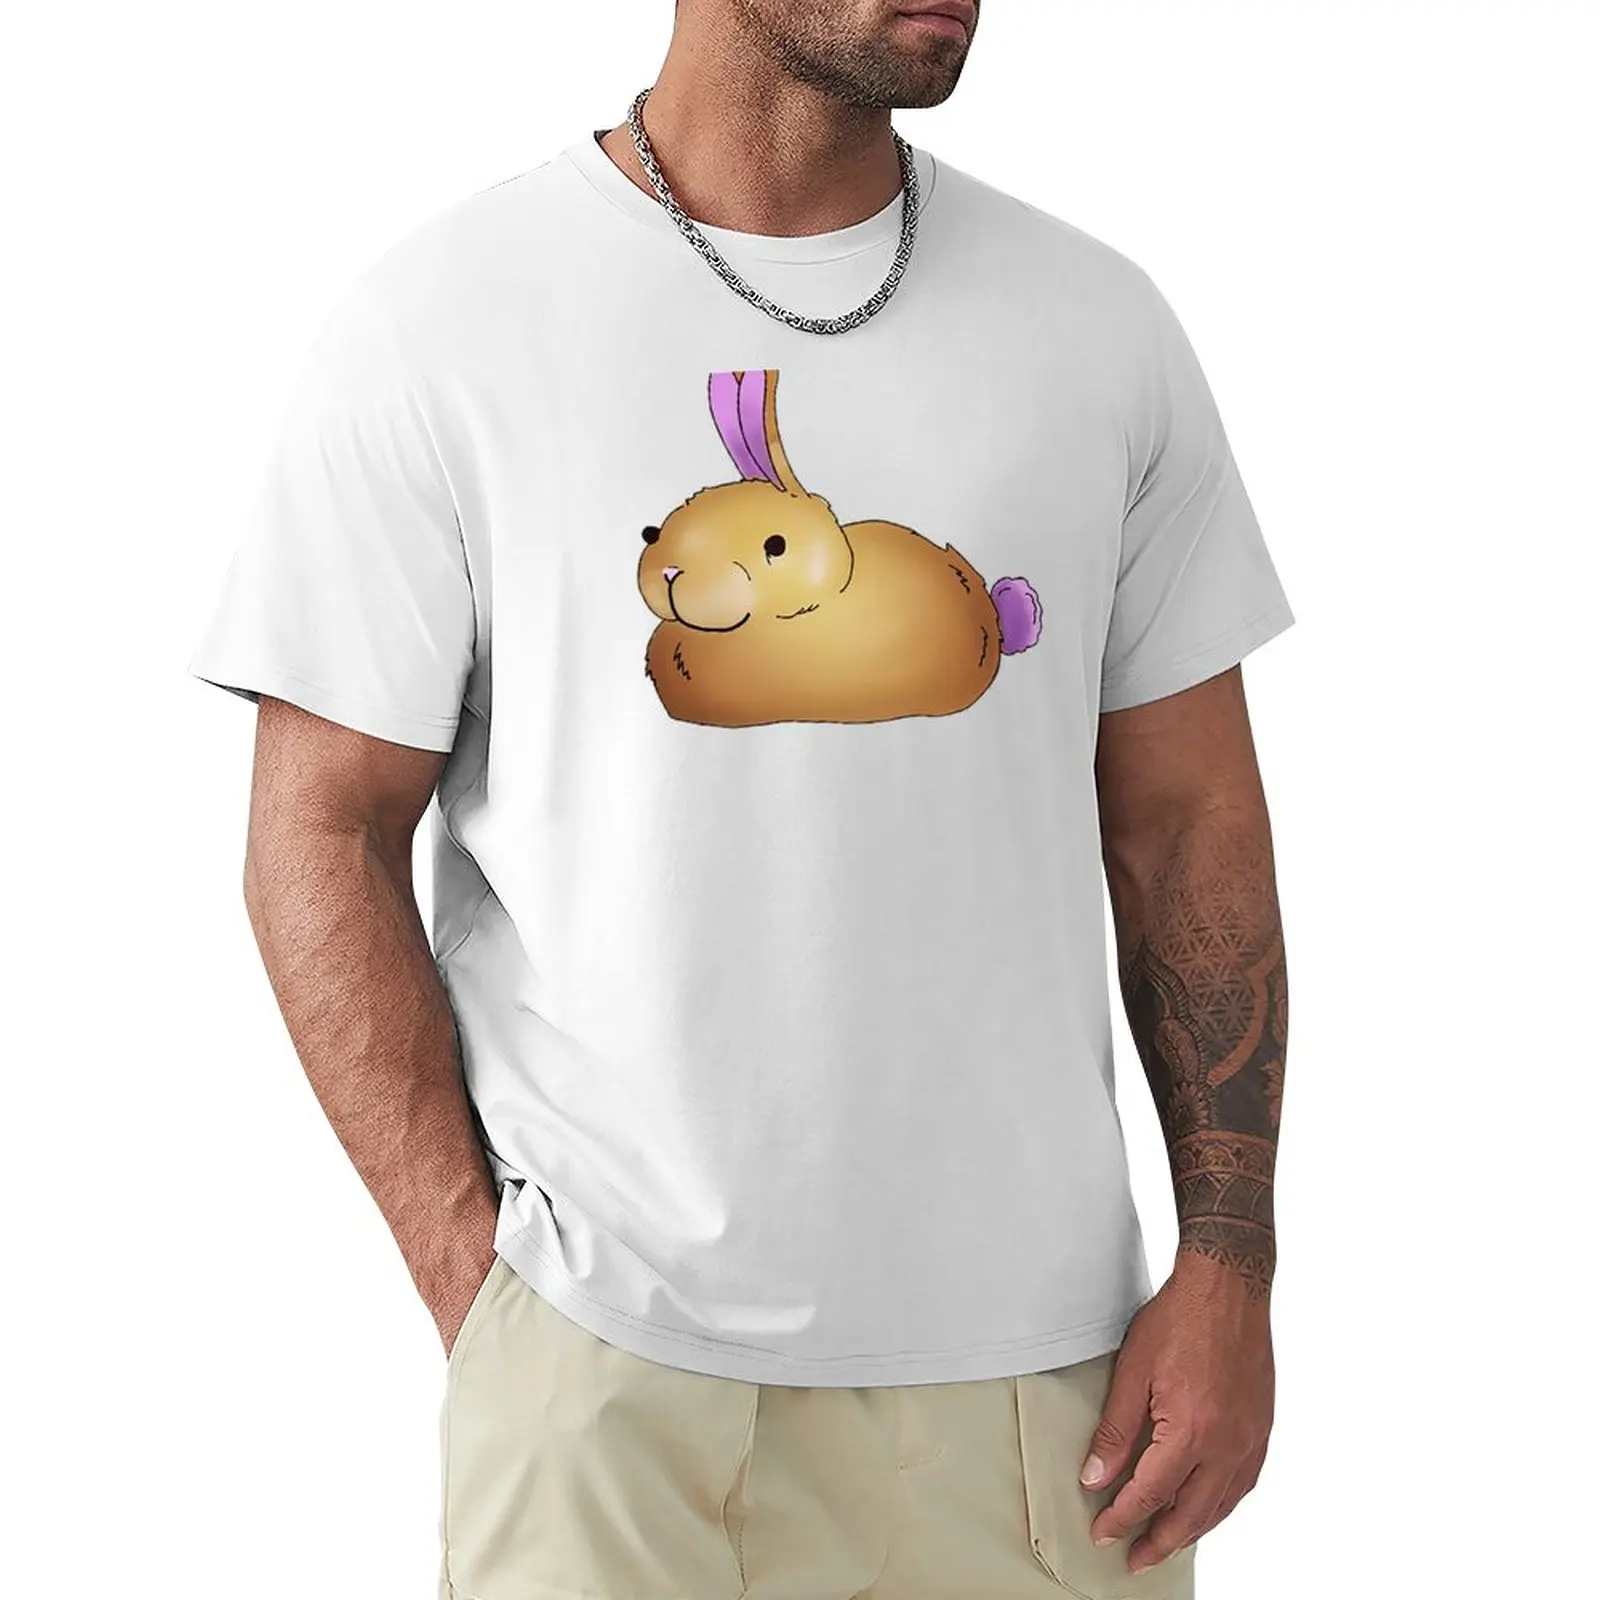 

Just Bunbun T-Shirt new edition customs design your own graphics fitted t shirts for men